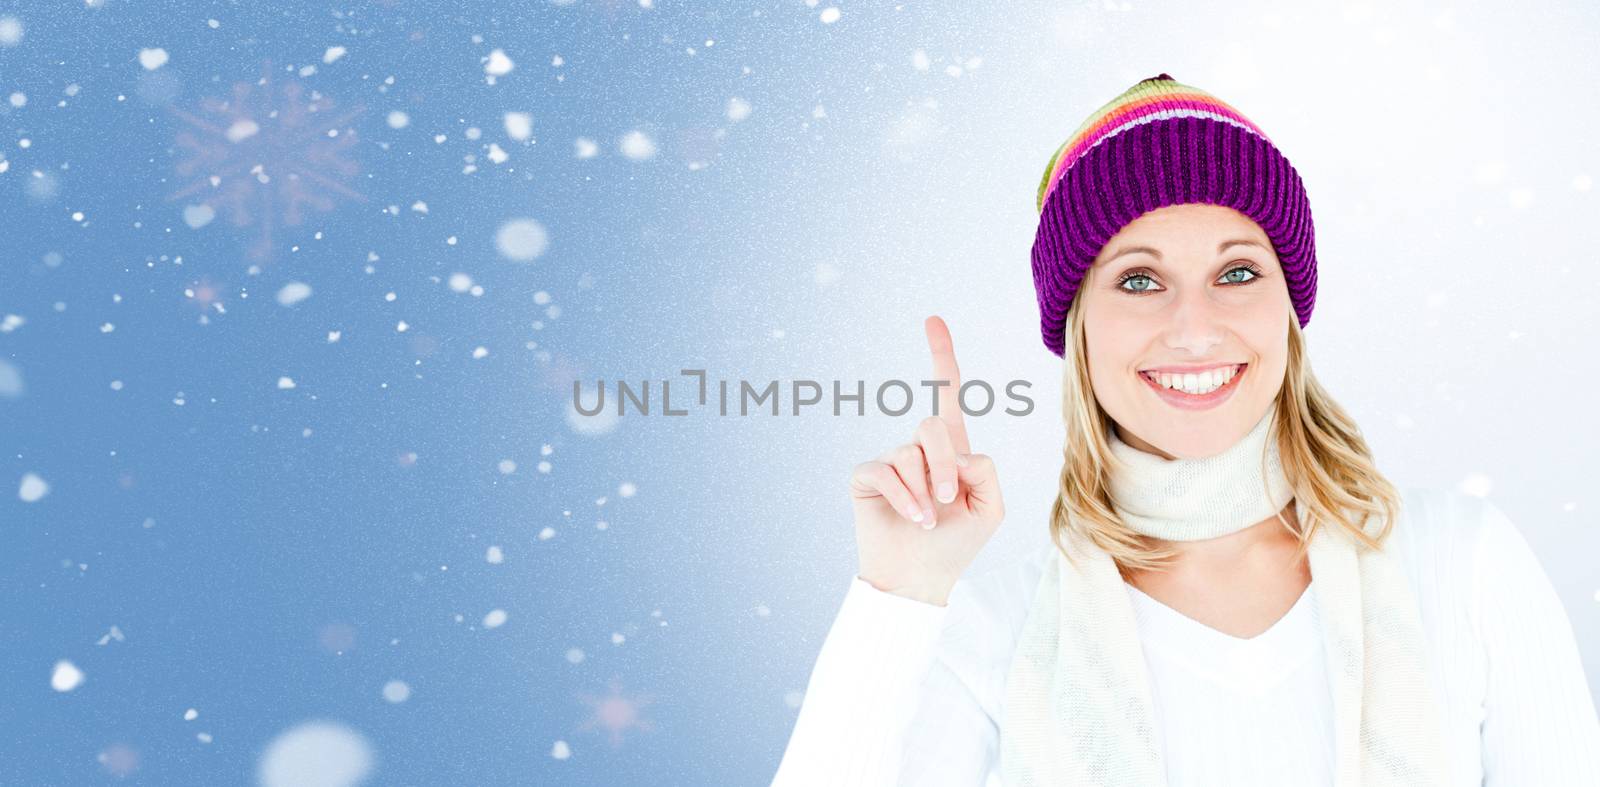 Joyful woman with a colorful hat pointing upwards against snow